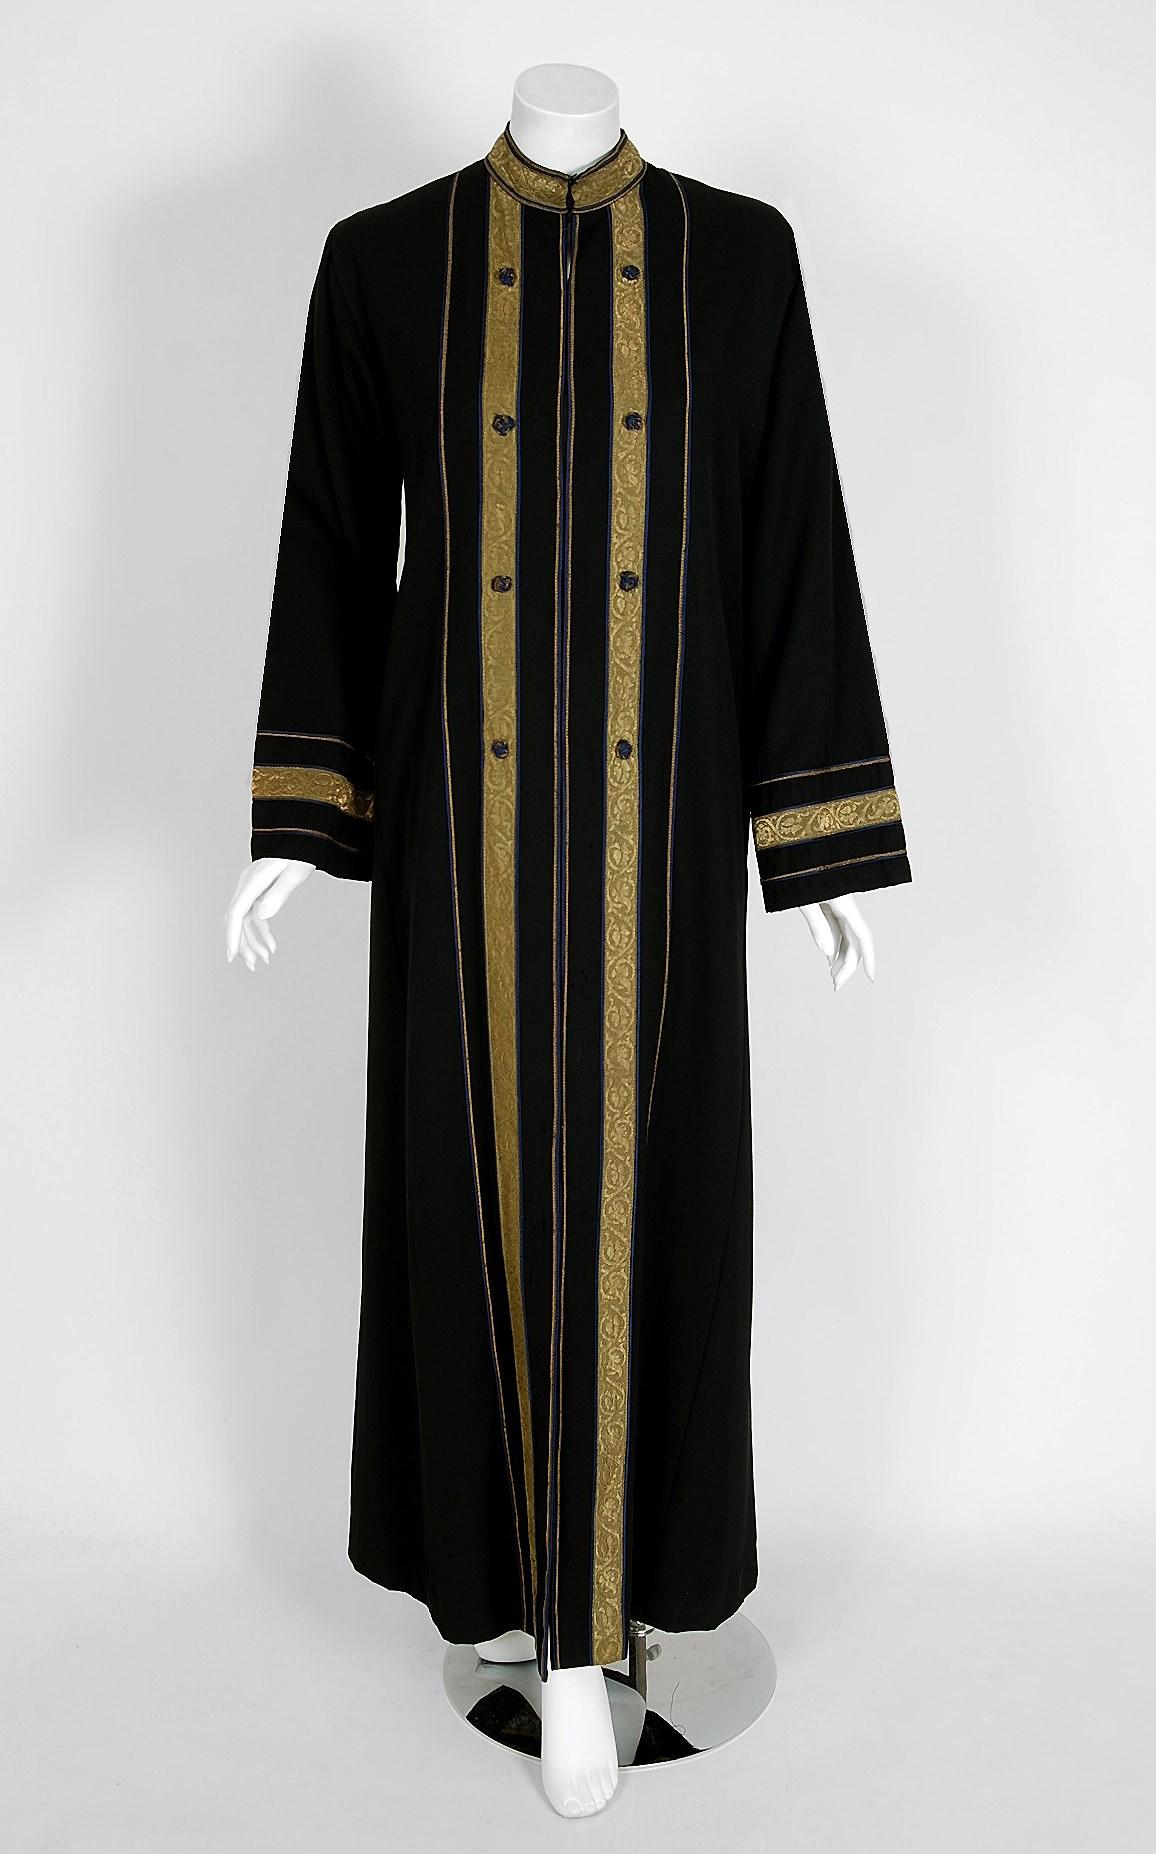 Gorgeous Thea Porter designer full length coat fashioned in the most beautiful black cotton-twill and textured metallic gold-lame dating back to the early 1970's. I love the nehru collar and over-sized side pockets. The open front silhouette allows